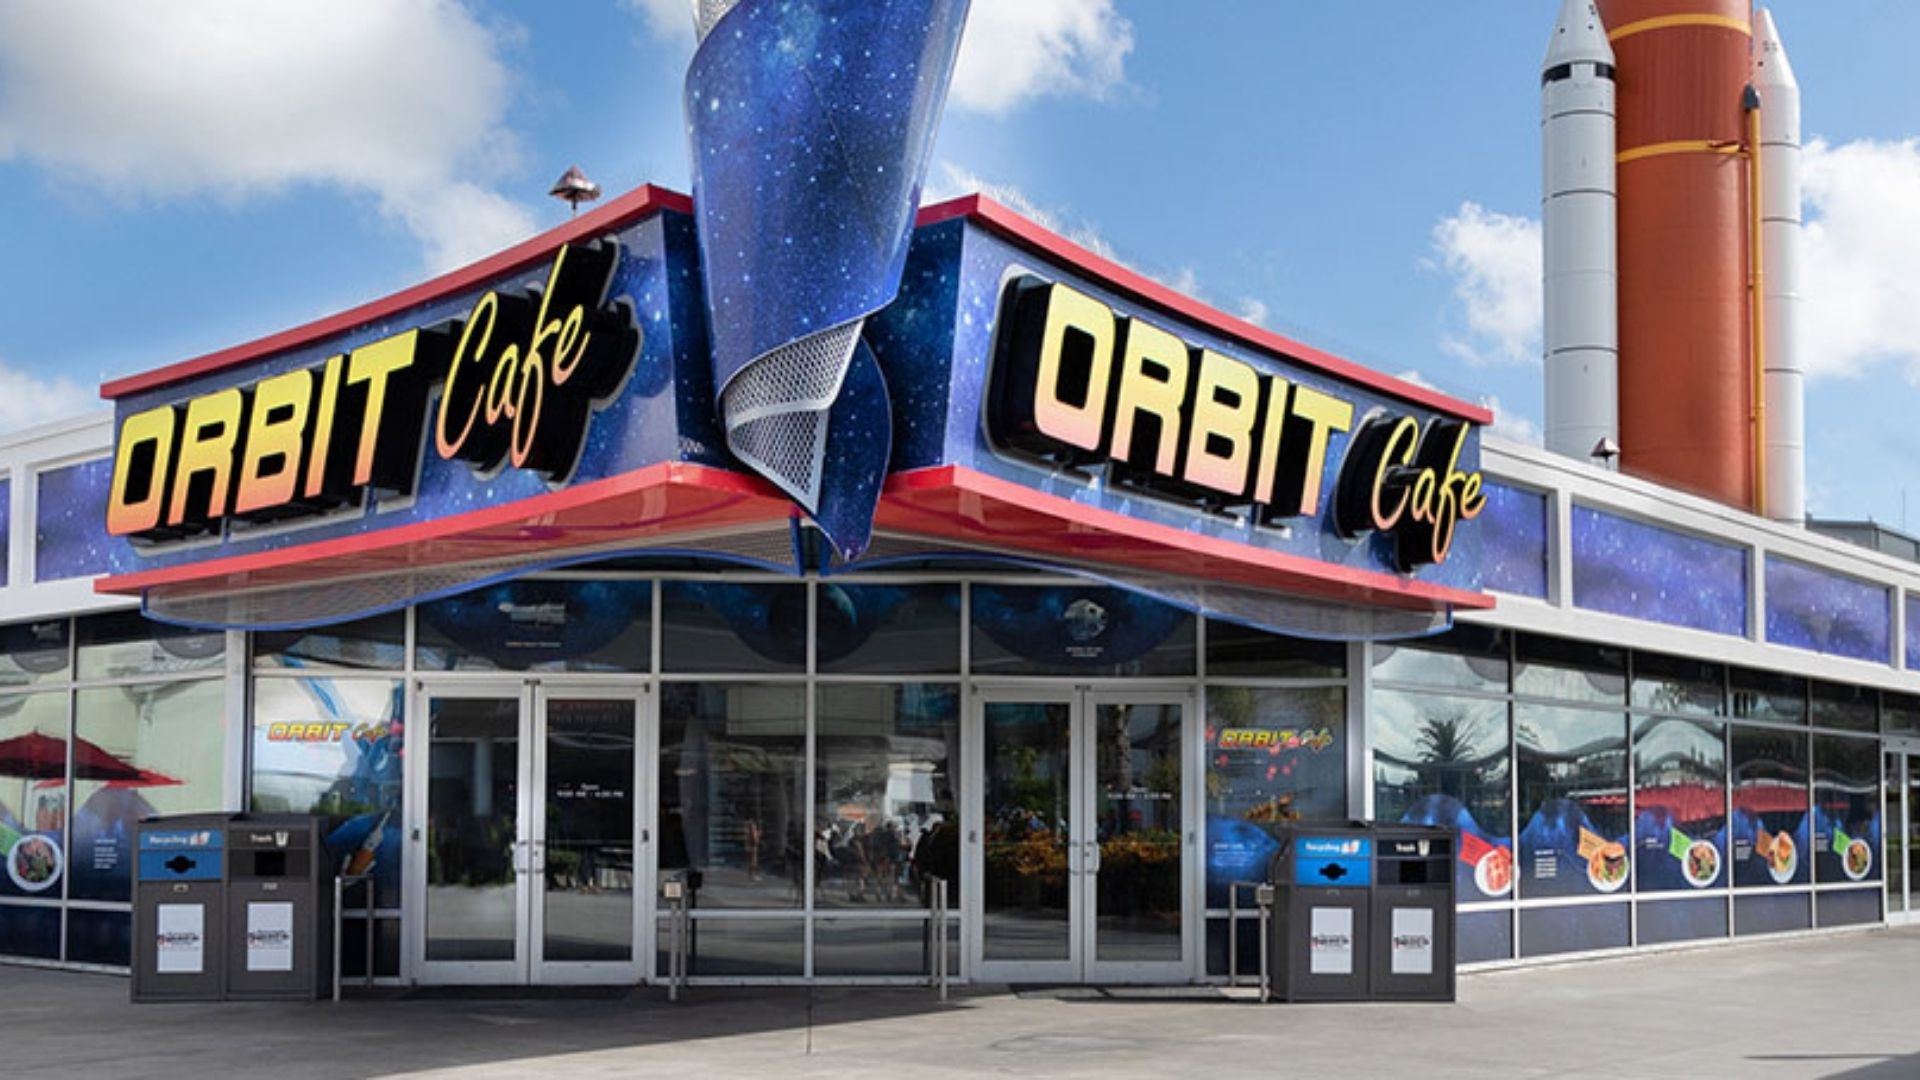 Orbit Cafe at Kennedy Space Center